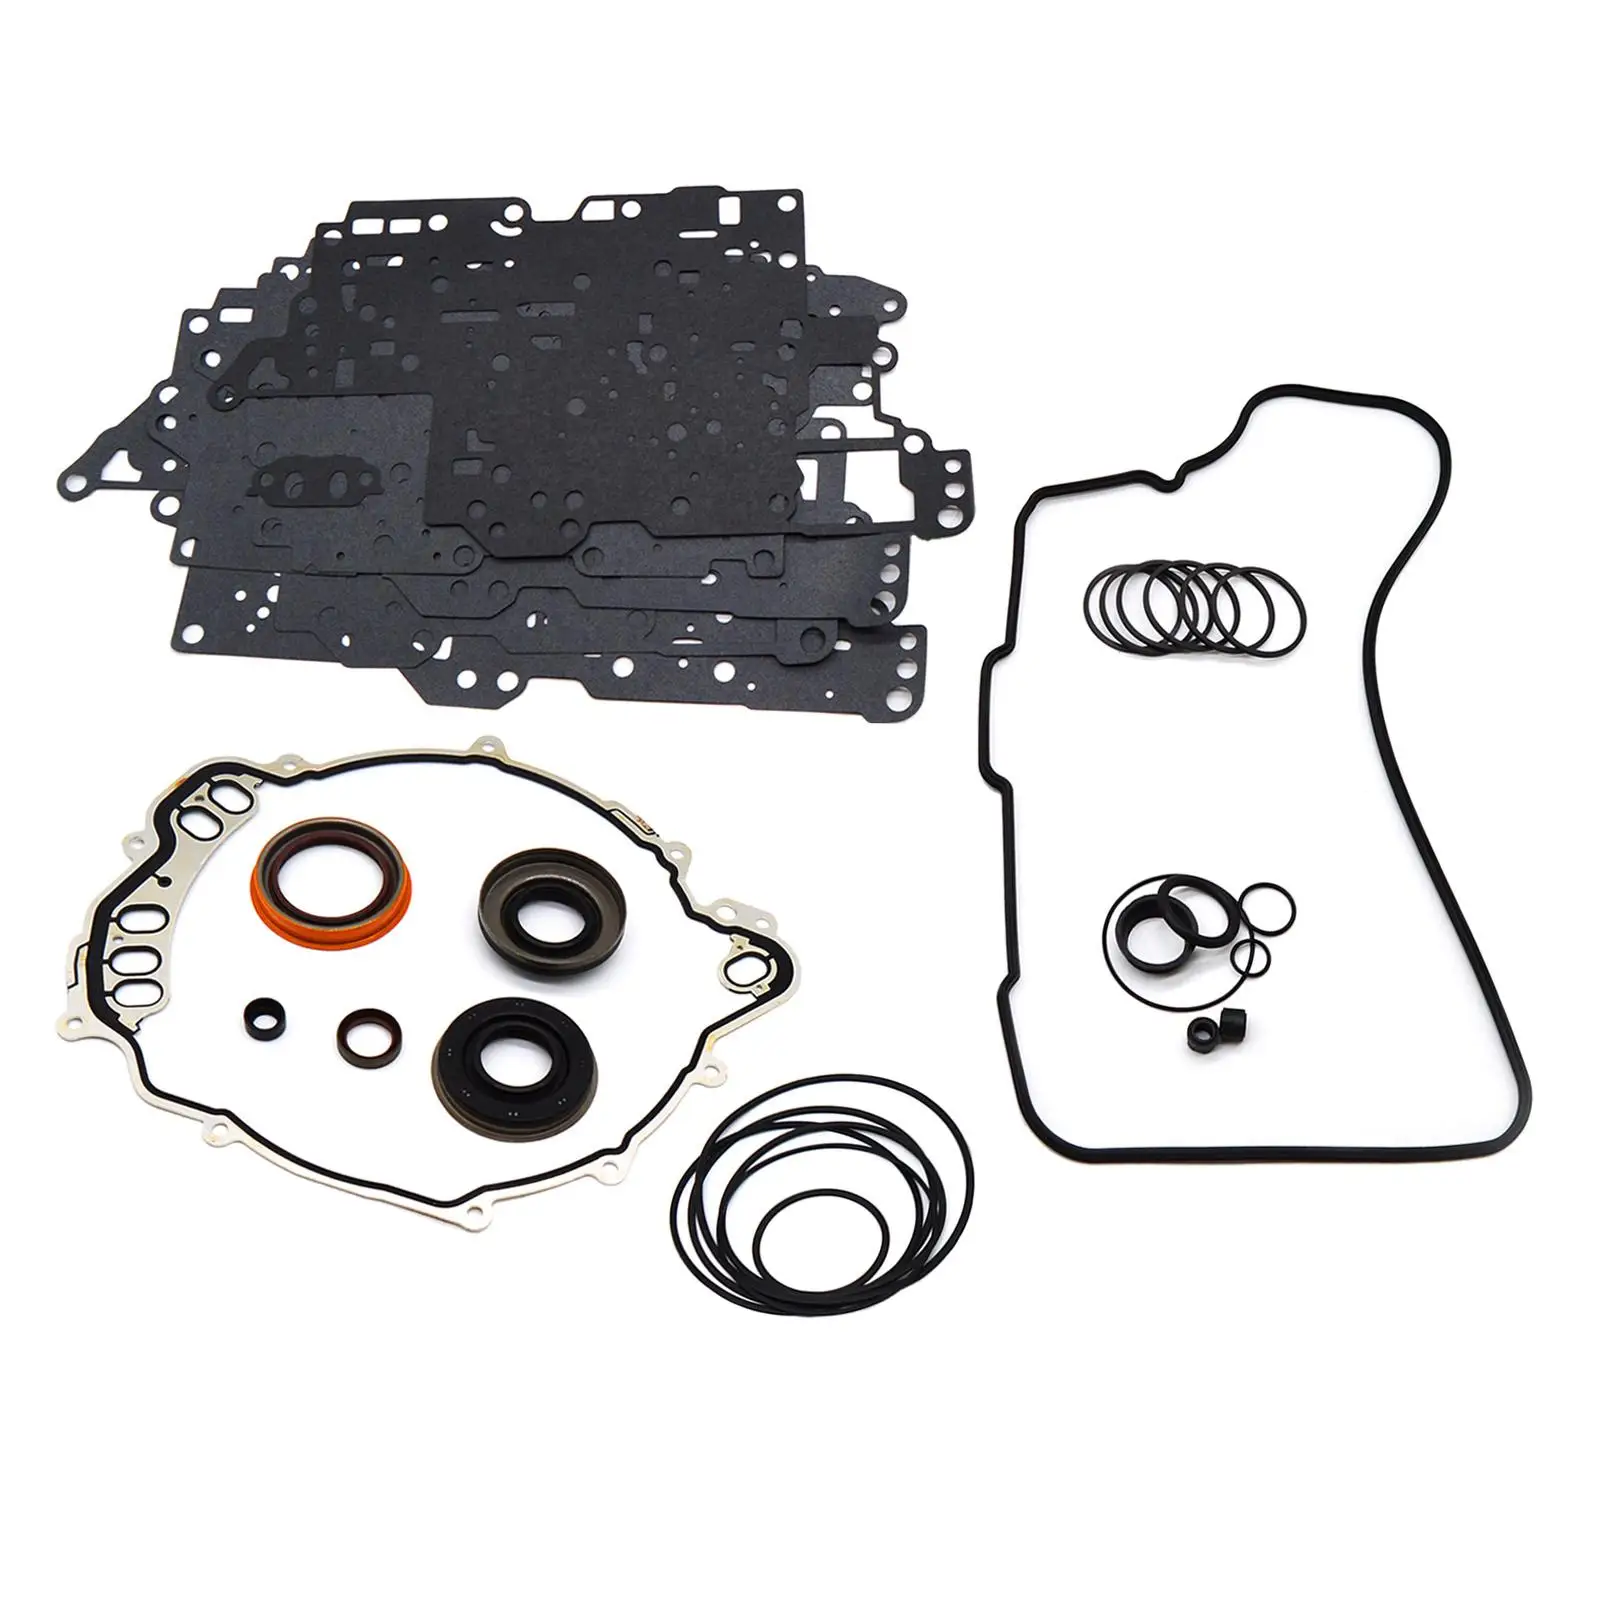 6T70 6T75 Auto Transmission Master Rebuild Kit Rubber Seals Gaskets Set Fits for Cadillac T19600A Accessories Car Supplies